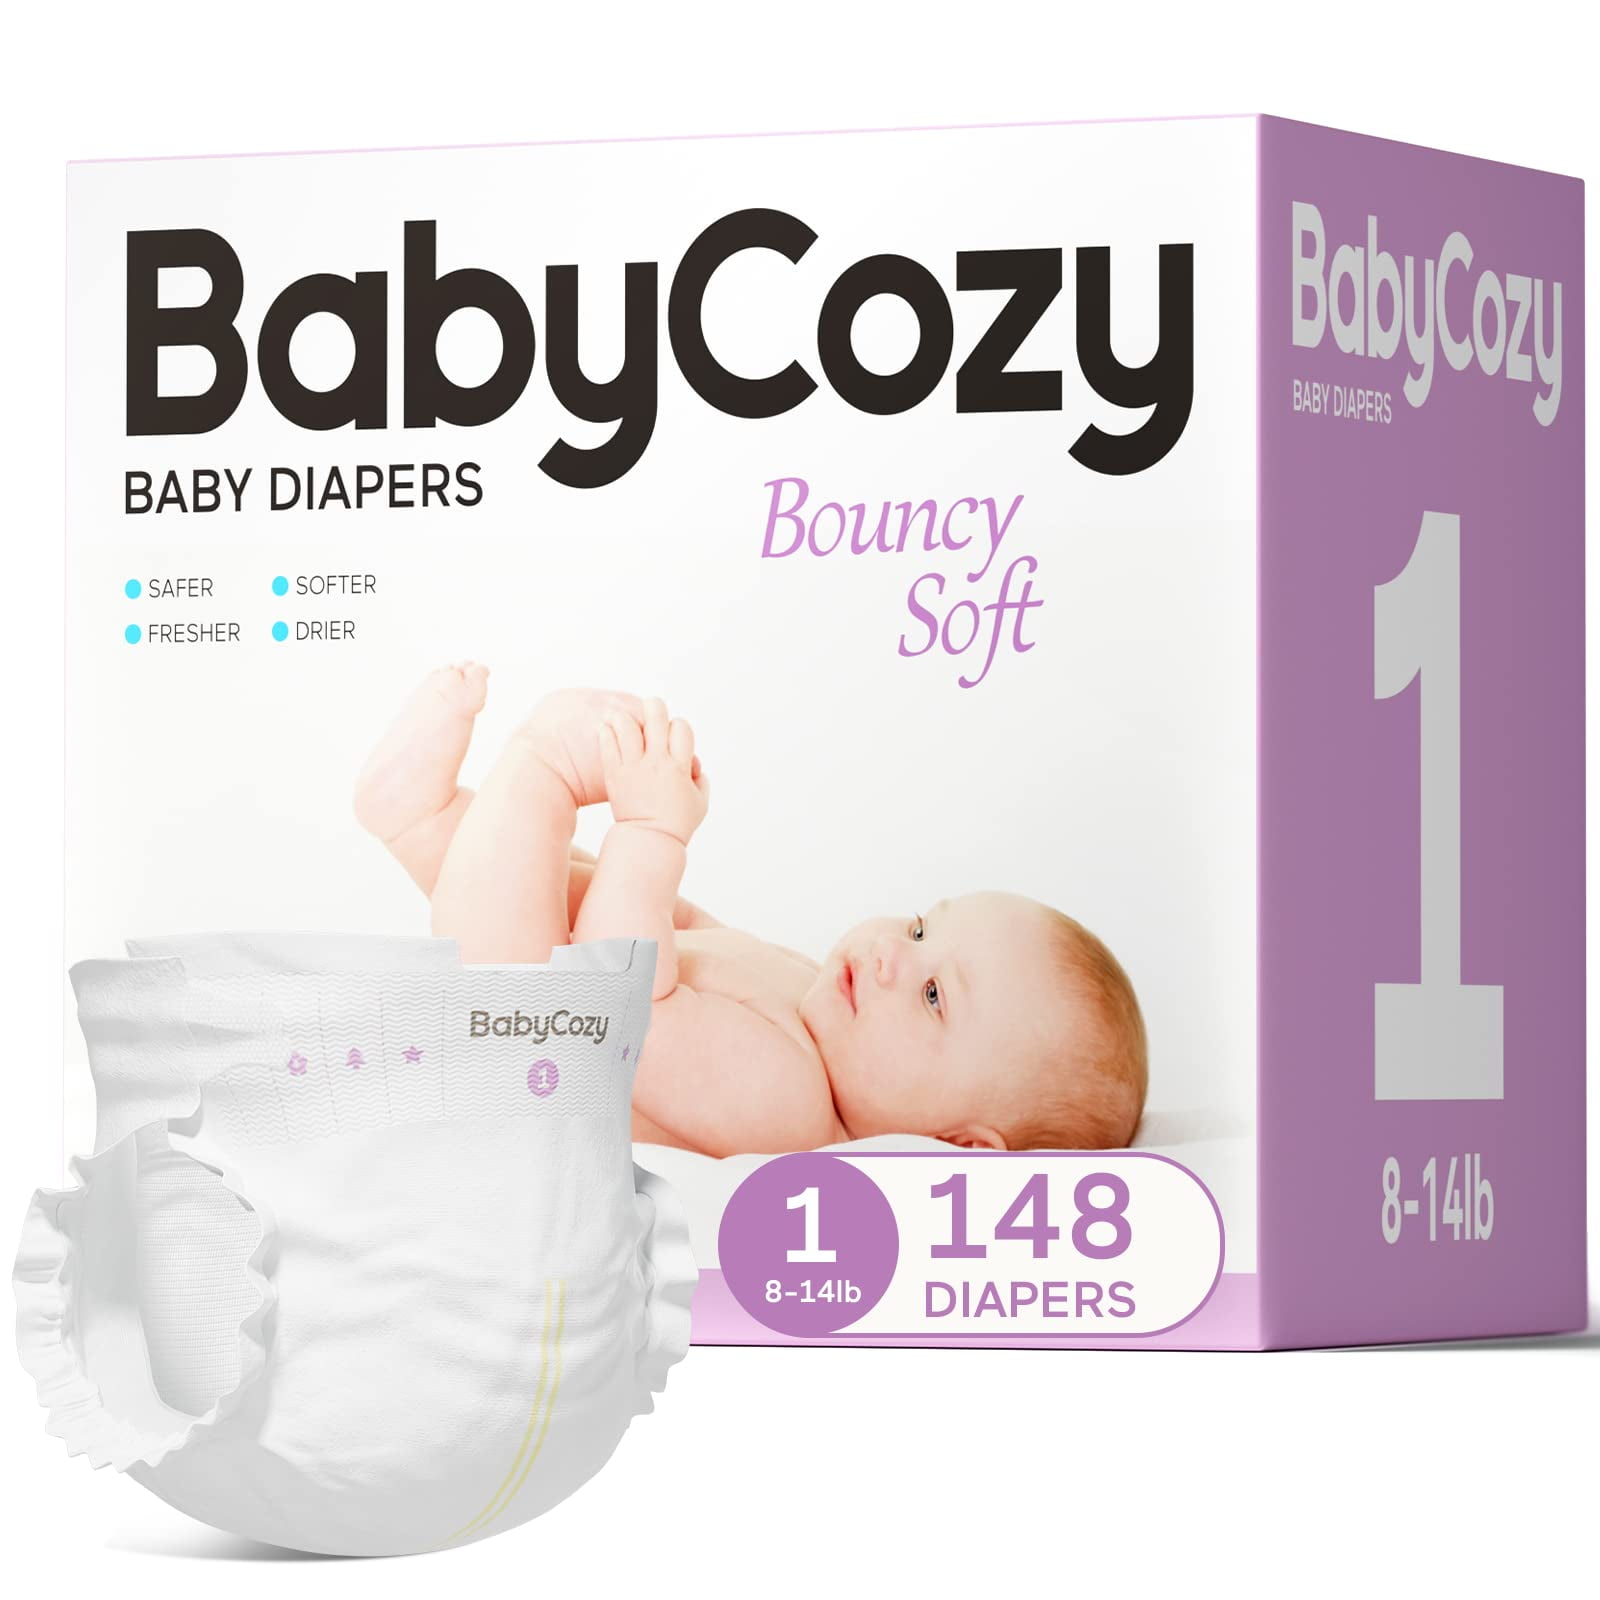 Newborn Baby Diapers Size 1(8-14lb) 148 Count Infant Diapers, Bouncy Soft  Diapers Fit Baby Preemie, Dry Disposable Diapers Hypoallergenic Without  Chlorine Safe for Sensitive Infant Skin 